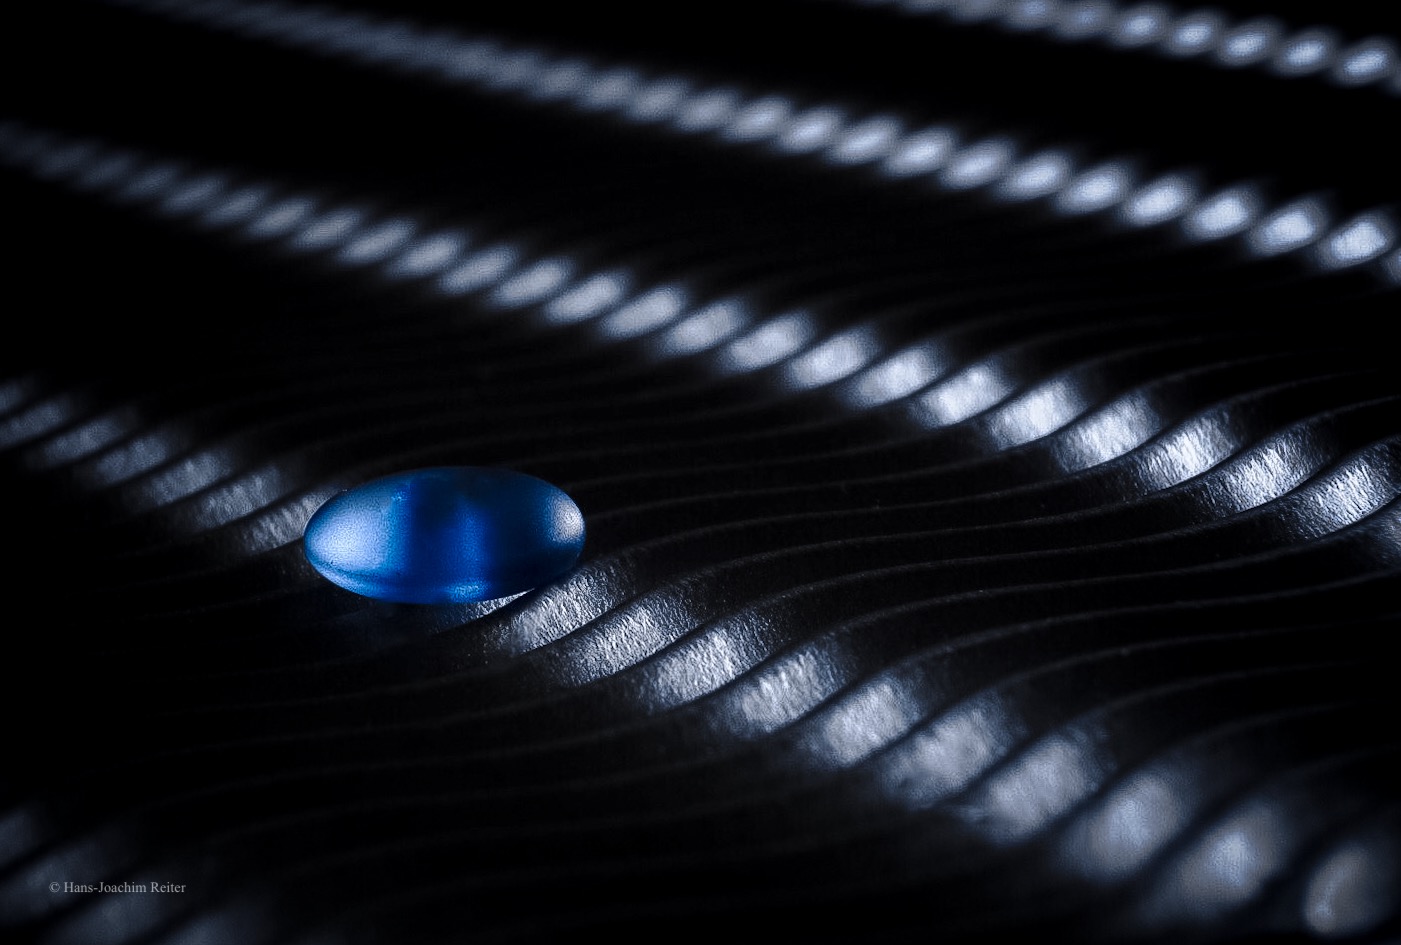 The Blue Disk...